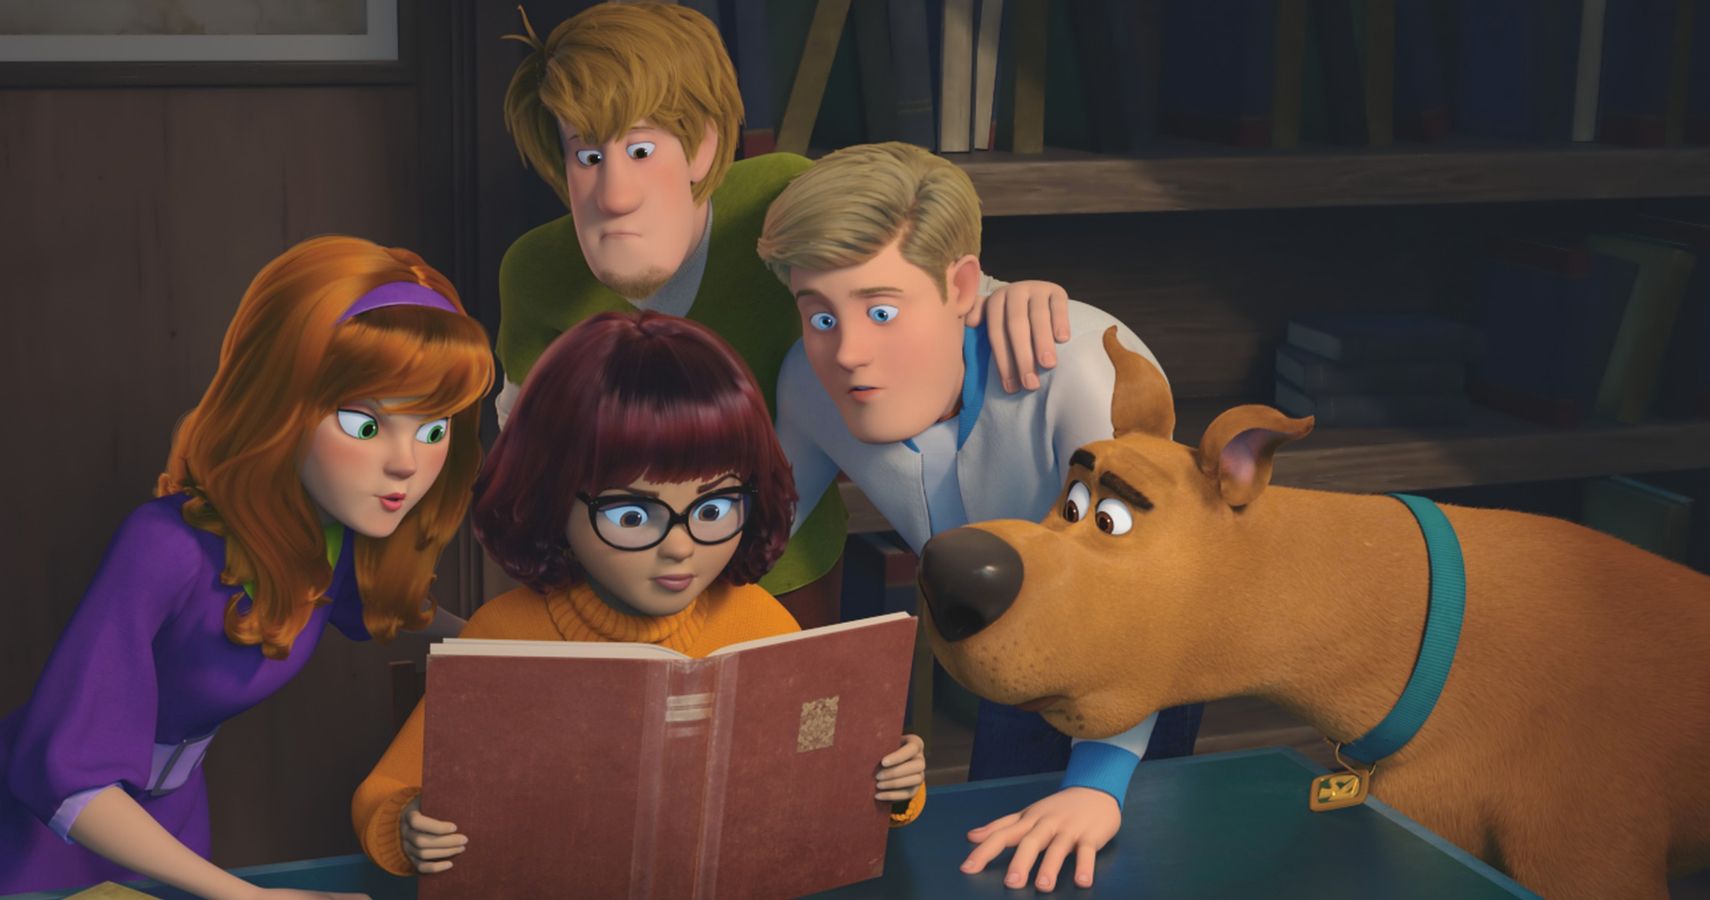 Scoob! Characters Sorted Into Hogwarts Houses